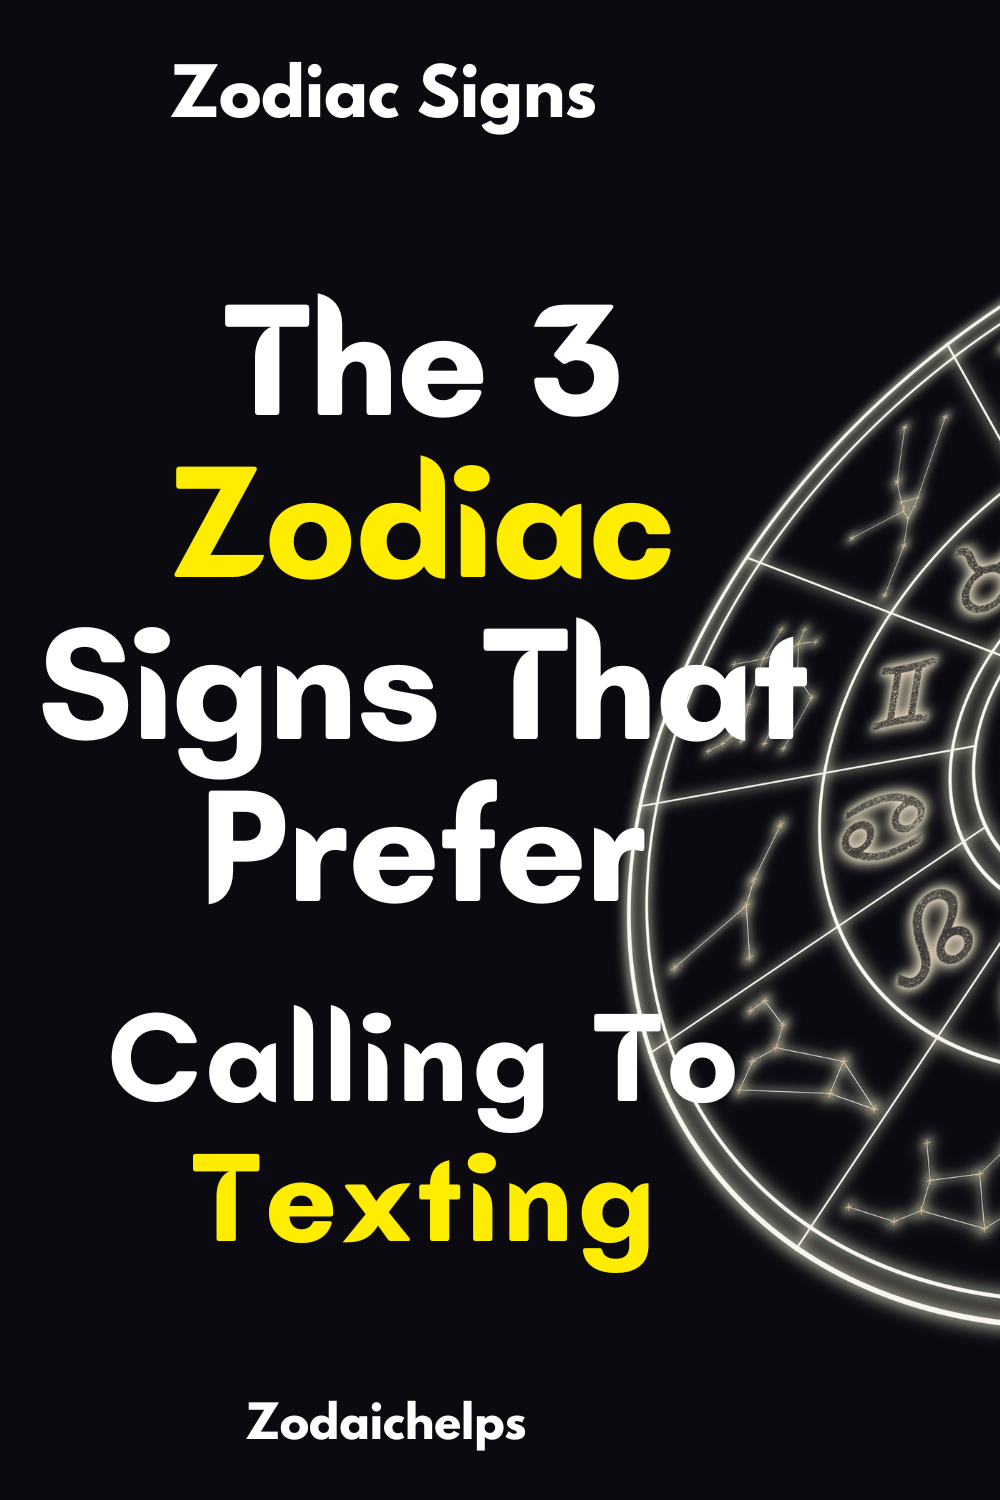 The 3 Zodiac Signs That Prefer Calling To Texting